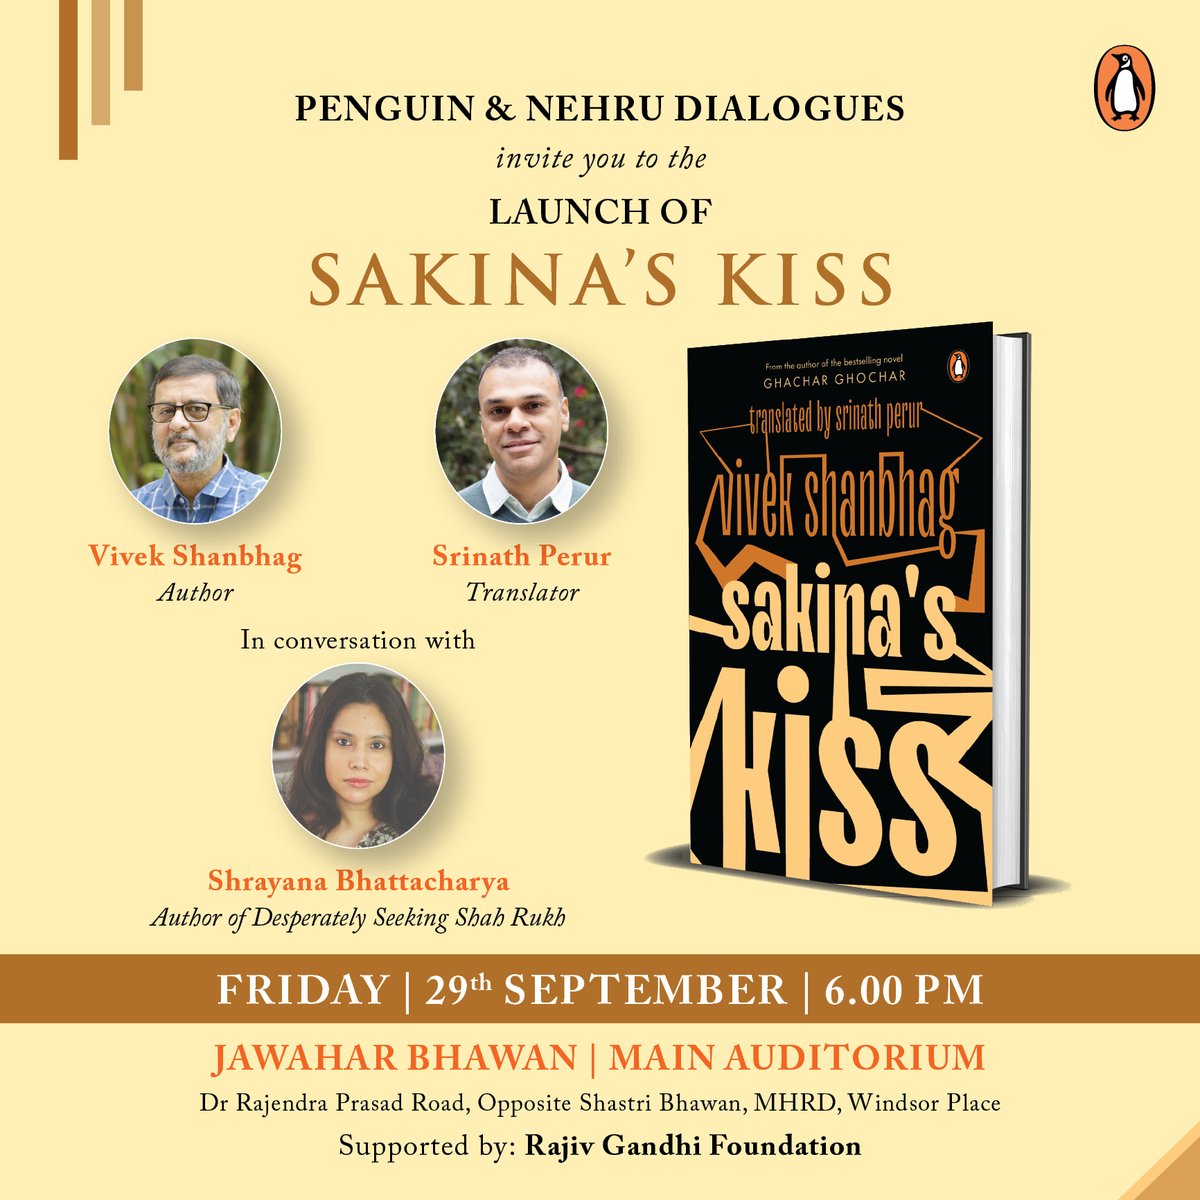 hold your horses for THE event of the season! #SakinasKiss author @VivekShanbhag0 and translator @sperur will be in conversation with @BShrayana! Mark your calendars and scribble in your diaries 🗓️